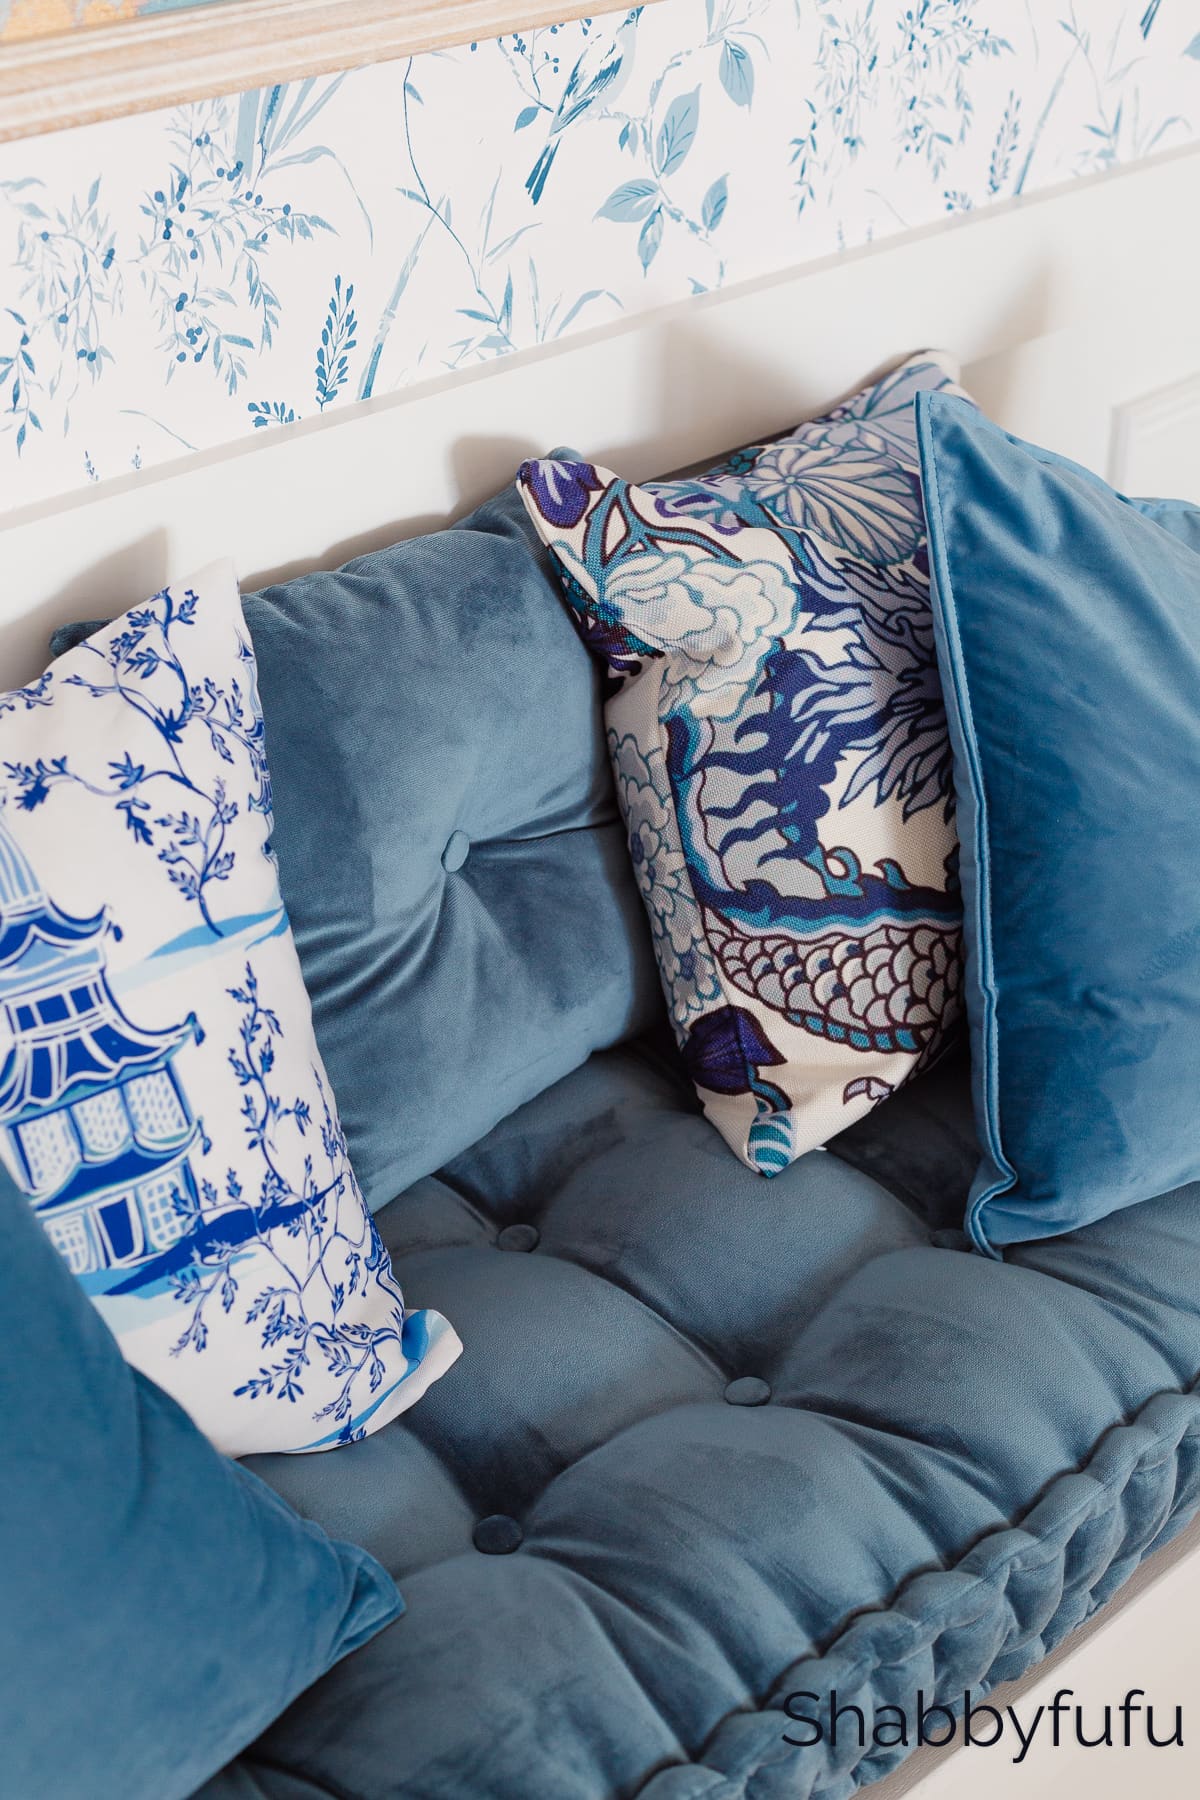 How To Mix Patterns In A Room Like A Designer